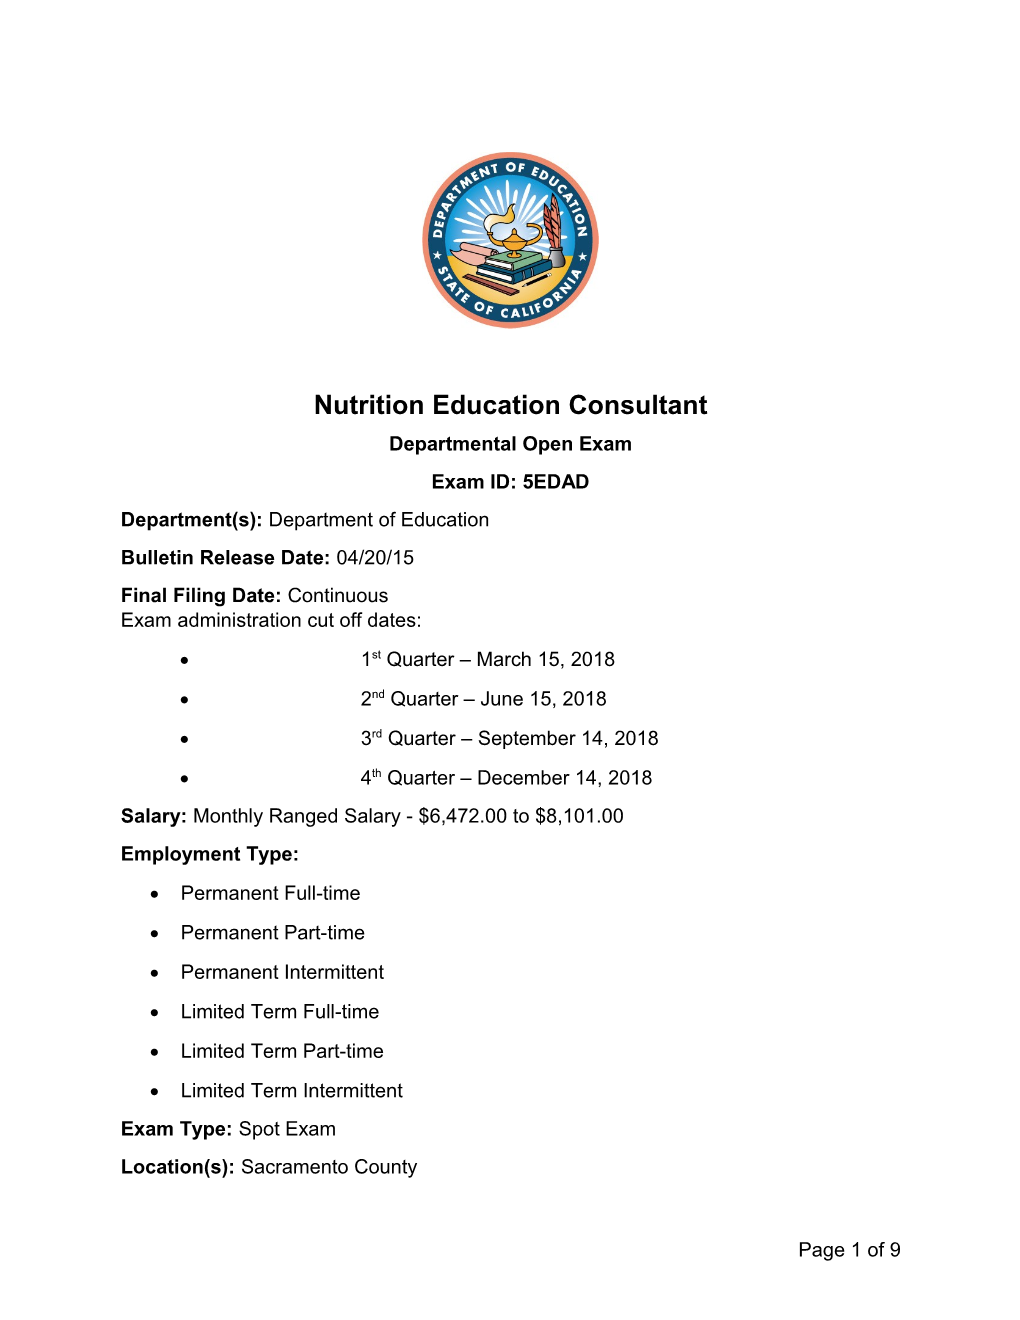 Nutrition Ed Cons. - Jobs at CDE (CA Dept of Education)